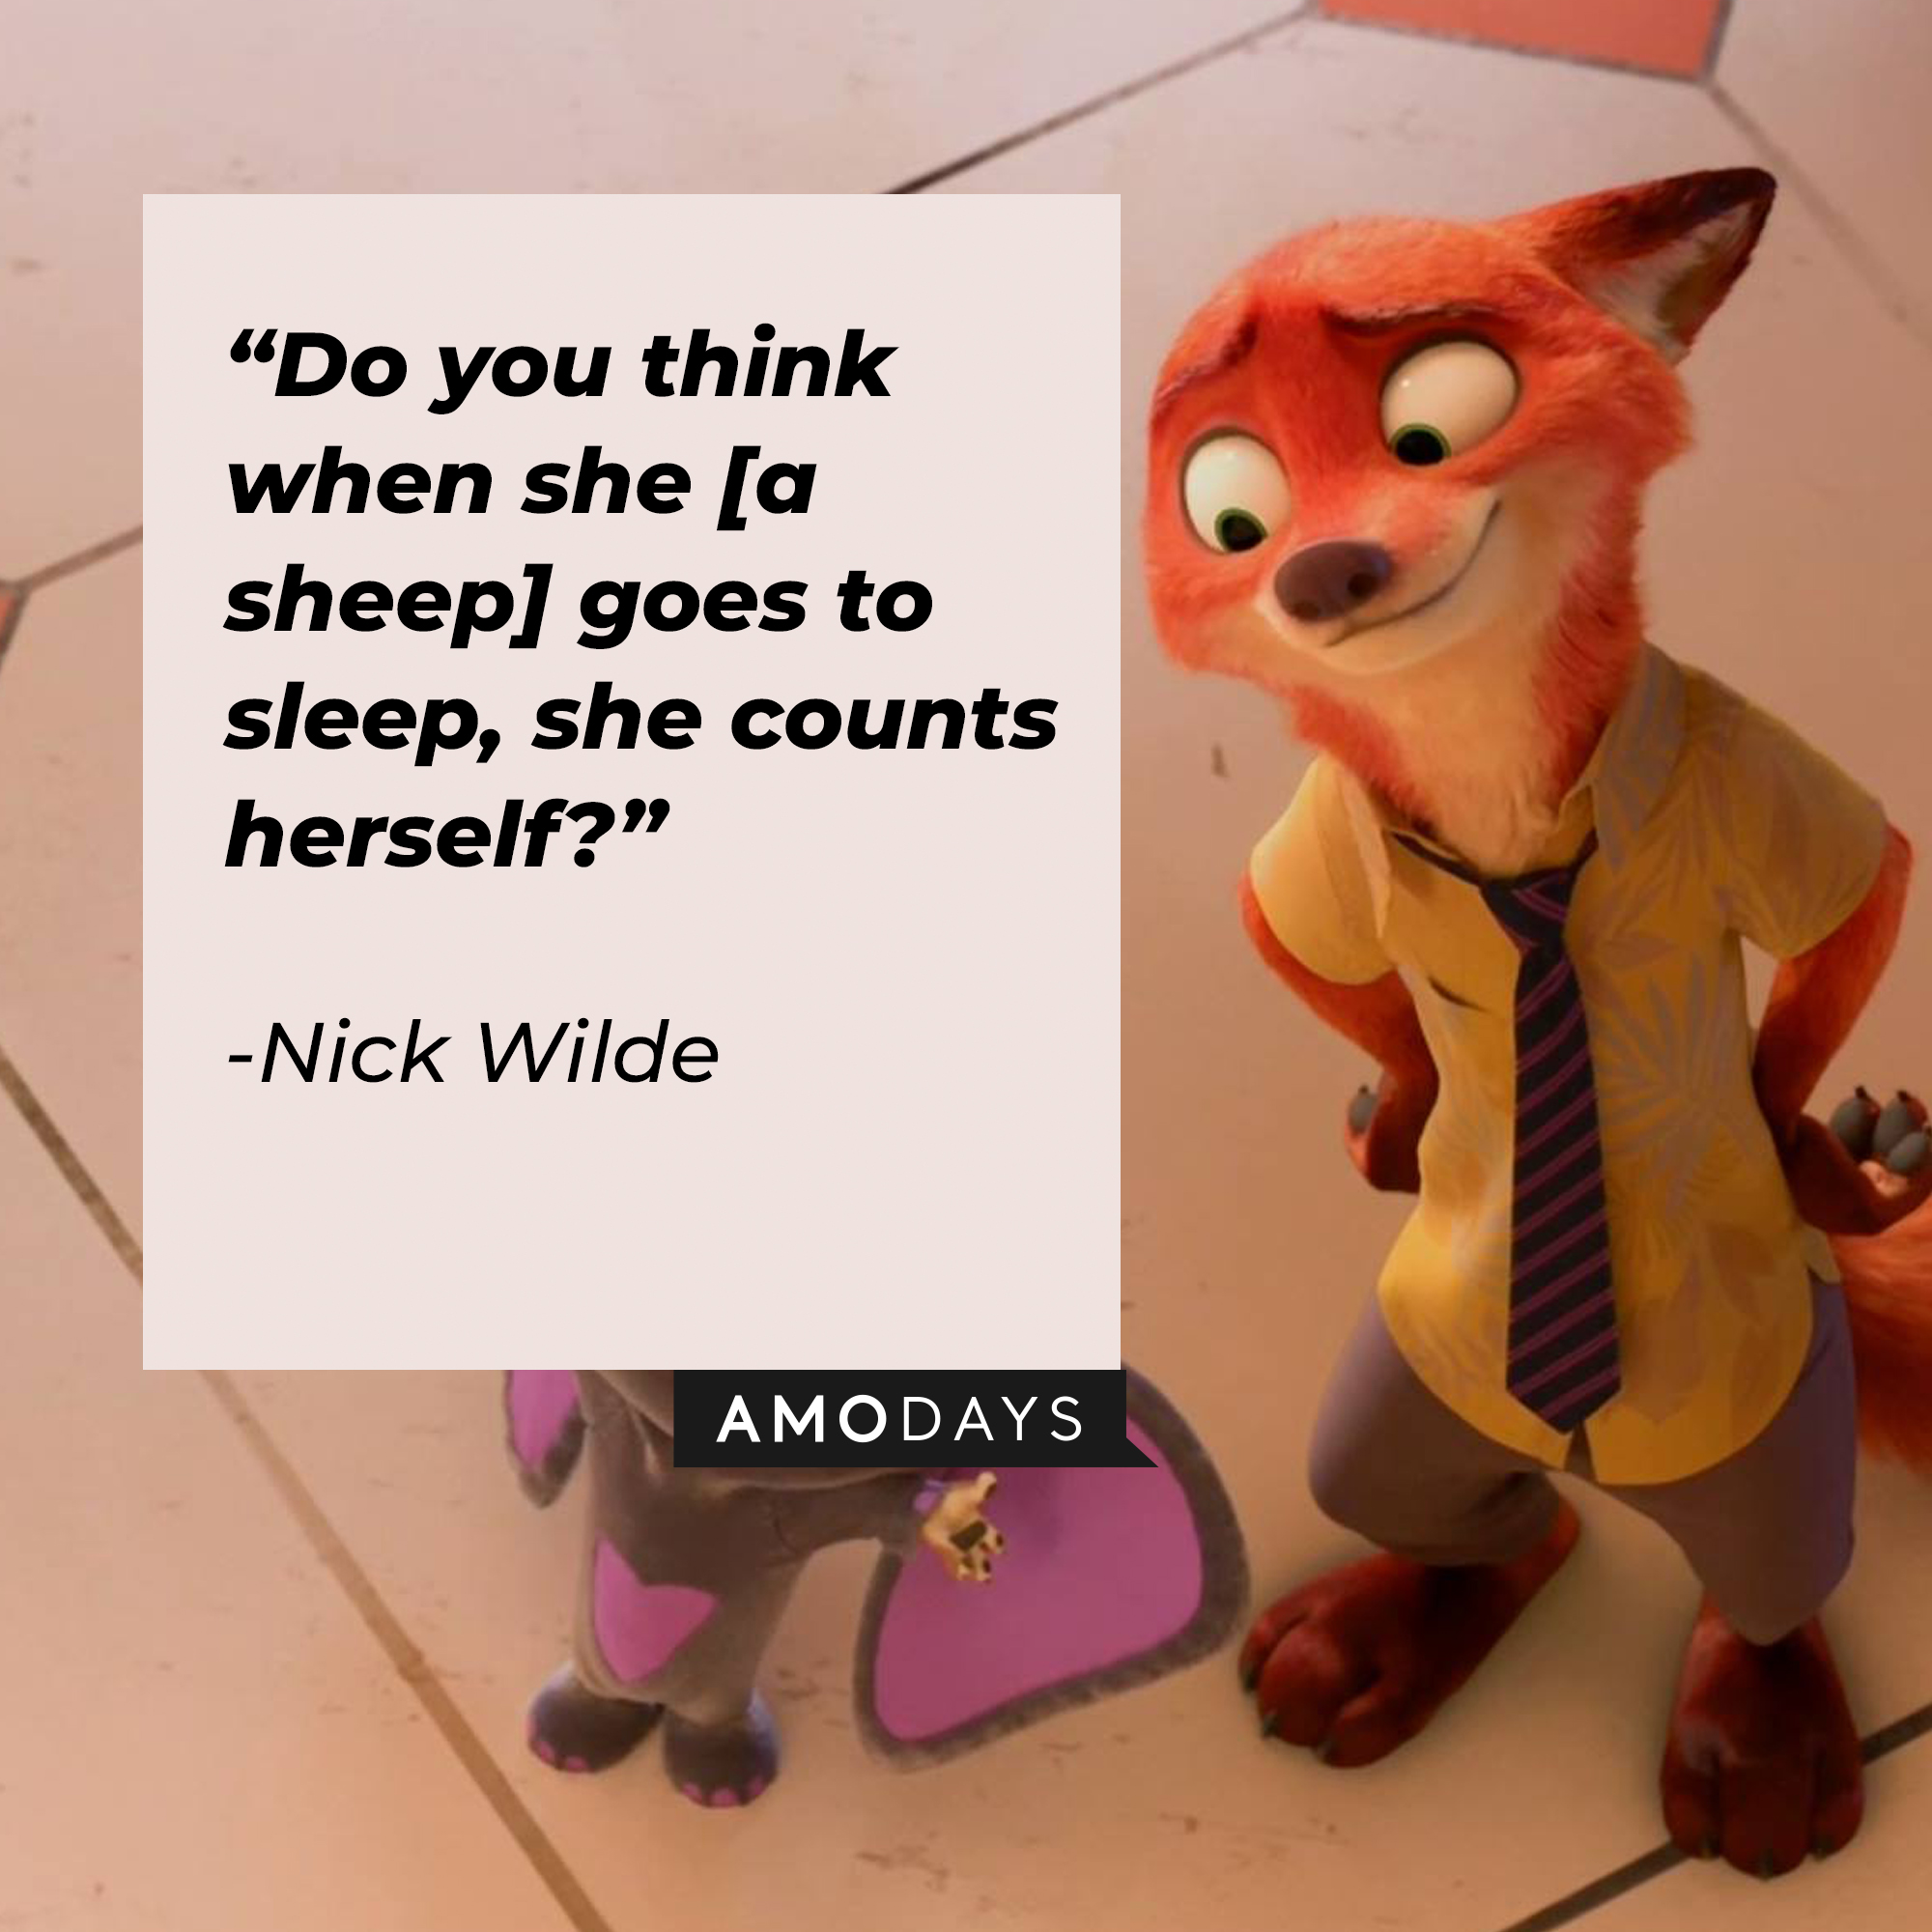 Nick Wilde, with his quote: "Do you think when she [a sheep] goes to sleep, she counts herself?" | Source: facebook.com/DisneyZootopia